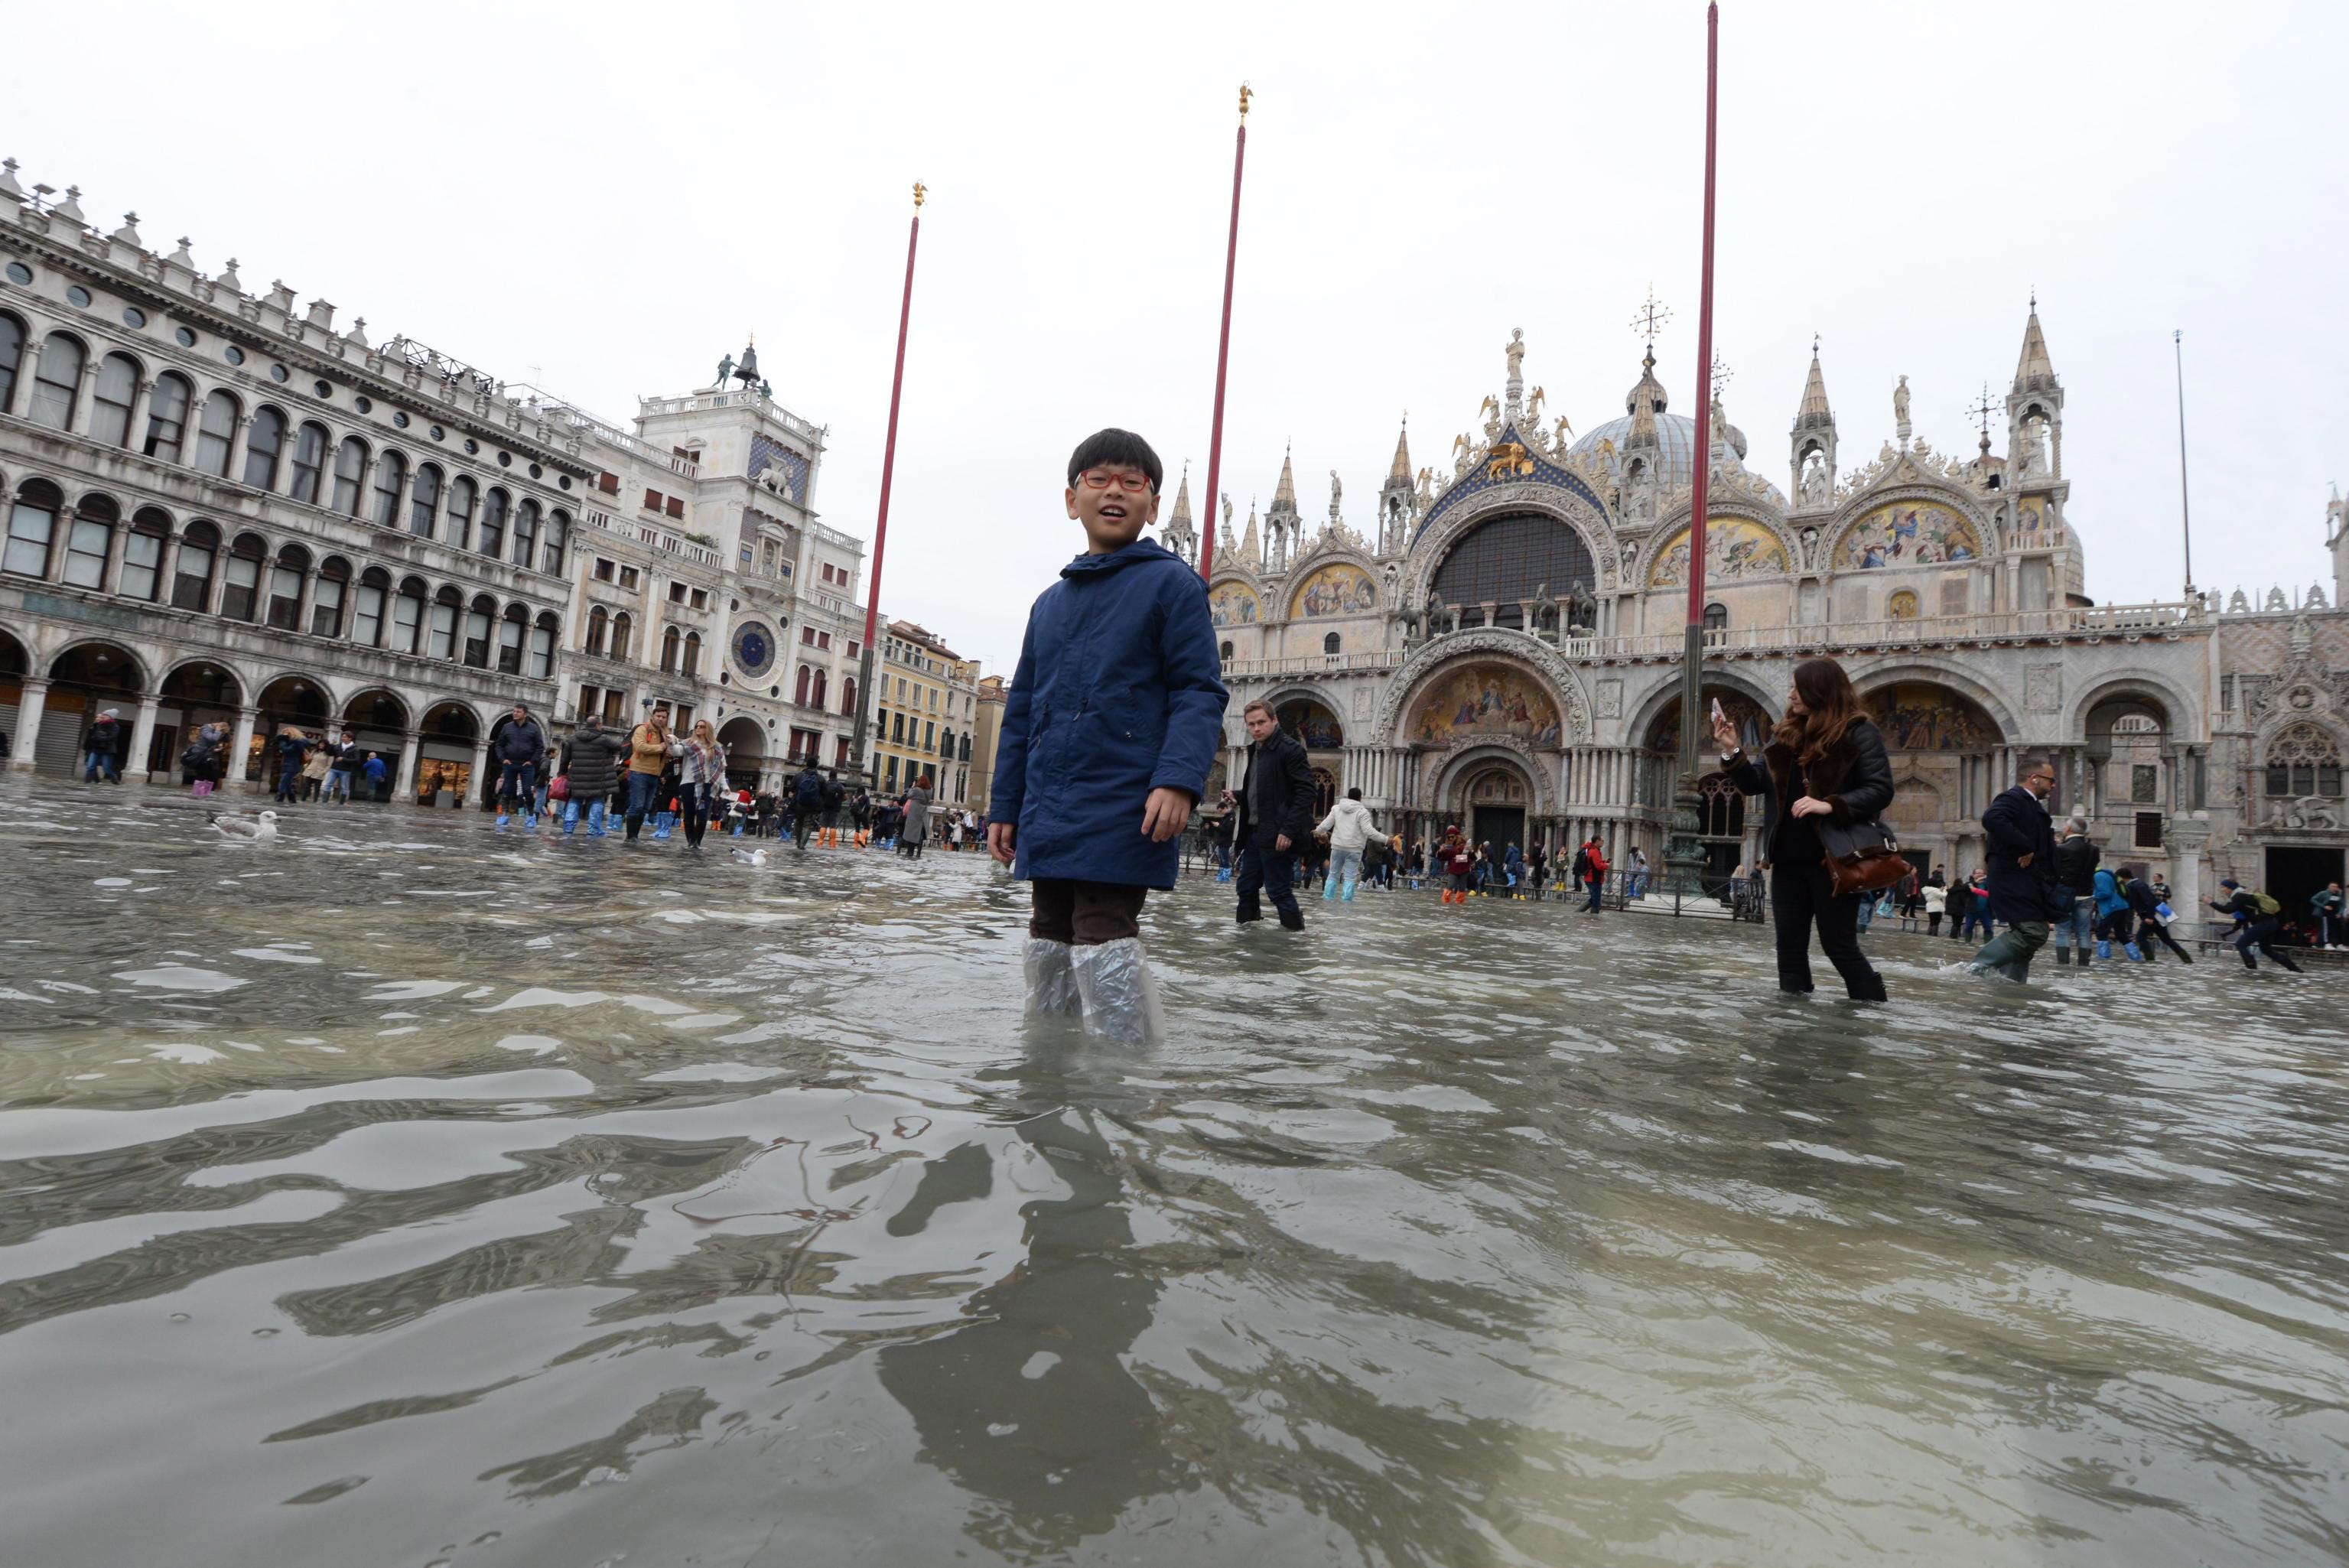 Venice Hit With Record Breaking Third Major Flood In Just Five Days